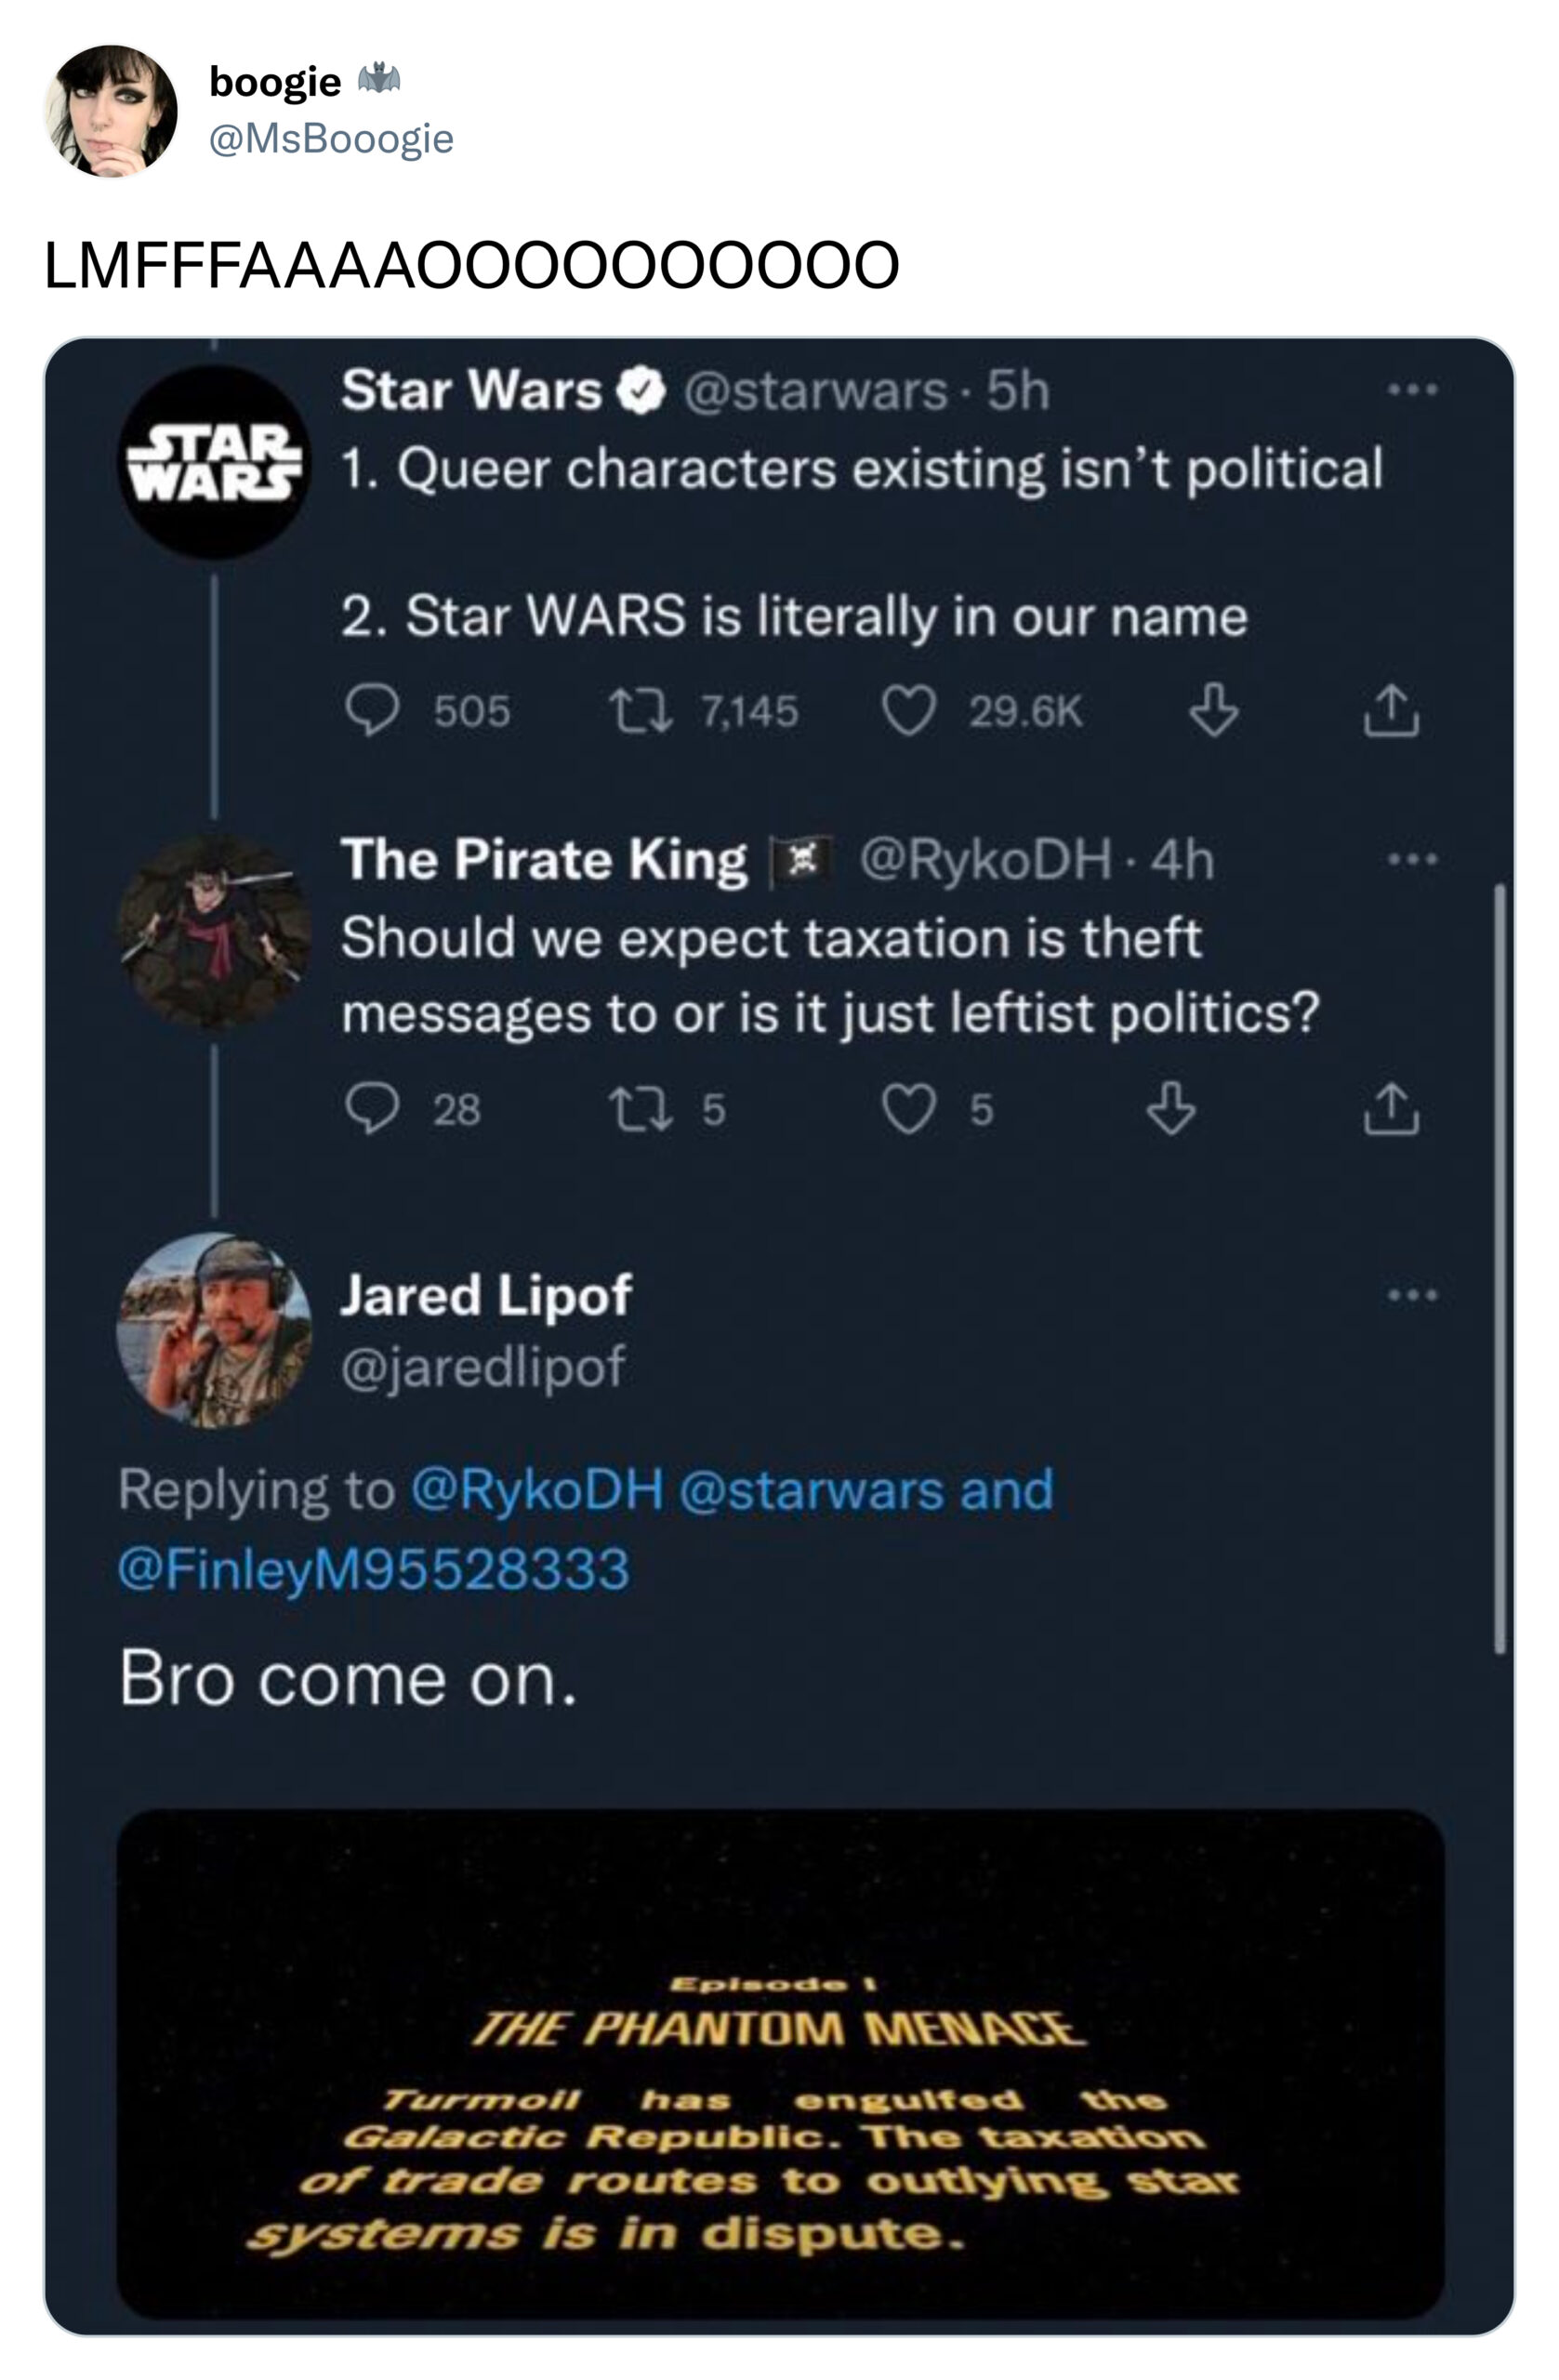 funny tweets - star wars - boogie LMFFFAAAA0000000000 Star Wars . 5h Star Wars 1. Queer characters existing isn't political 2. Star Wars is literally in our name 505 7,145 The Pirate King 4h Should we expect taxation is theft messages to or is it just lef